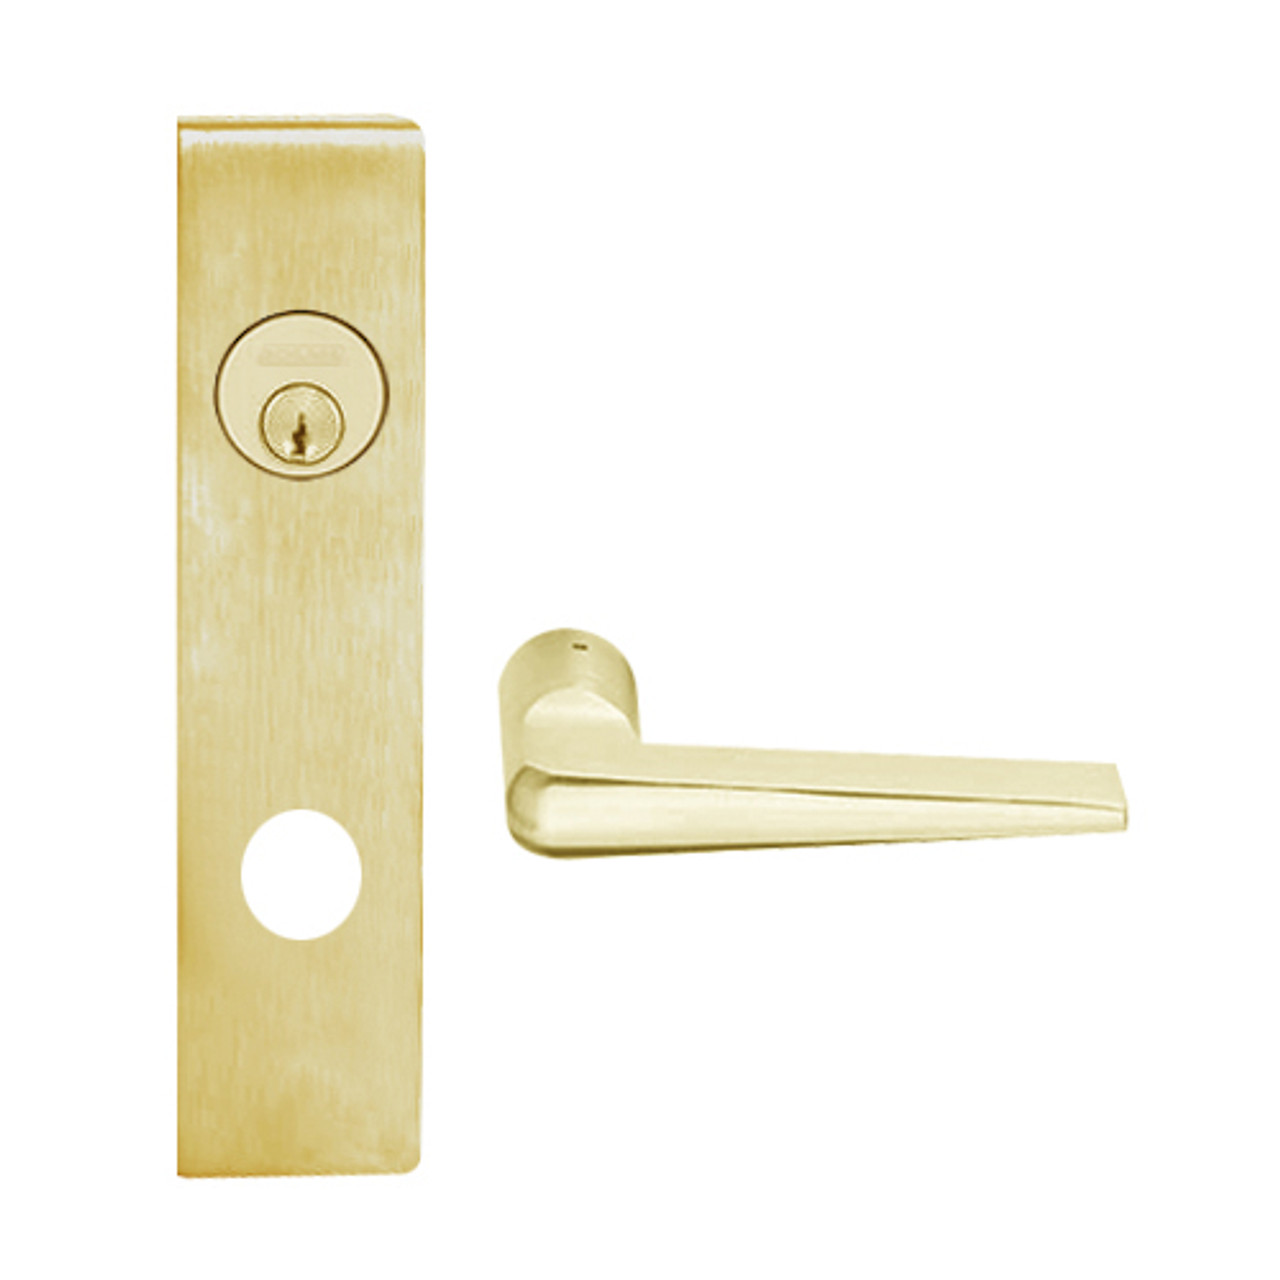 L9070L-05L-606 Schlage L Series Less Cylinder Classroom Commercial Mortise Lock with 05 Cast Lever Design in Satin Brass